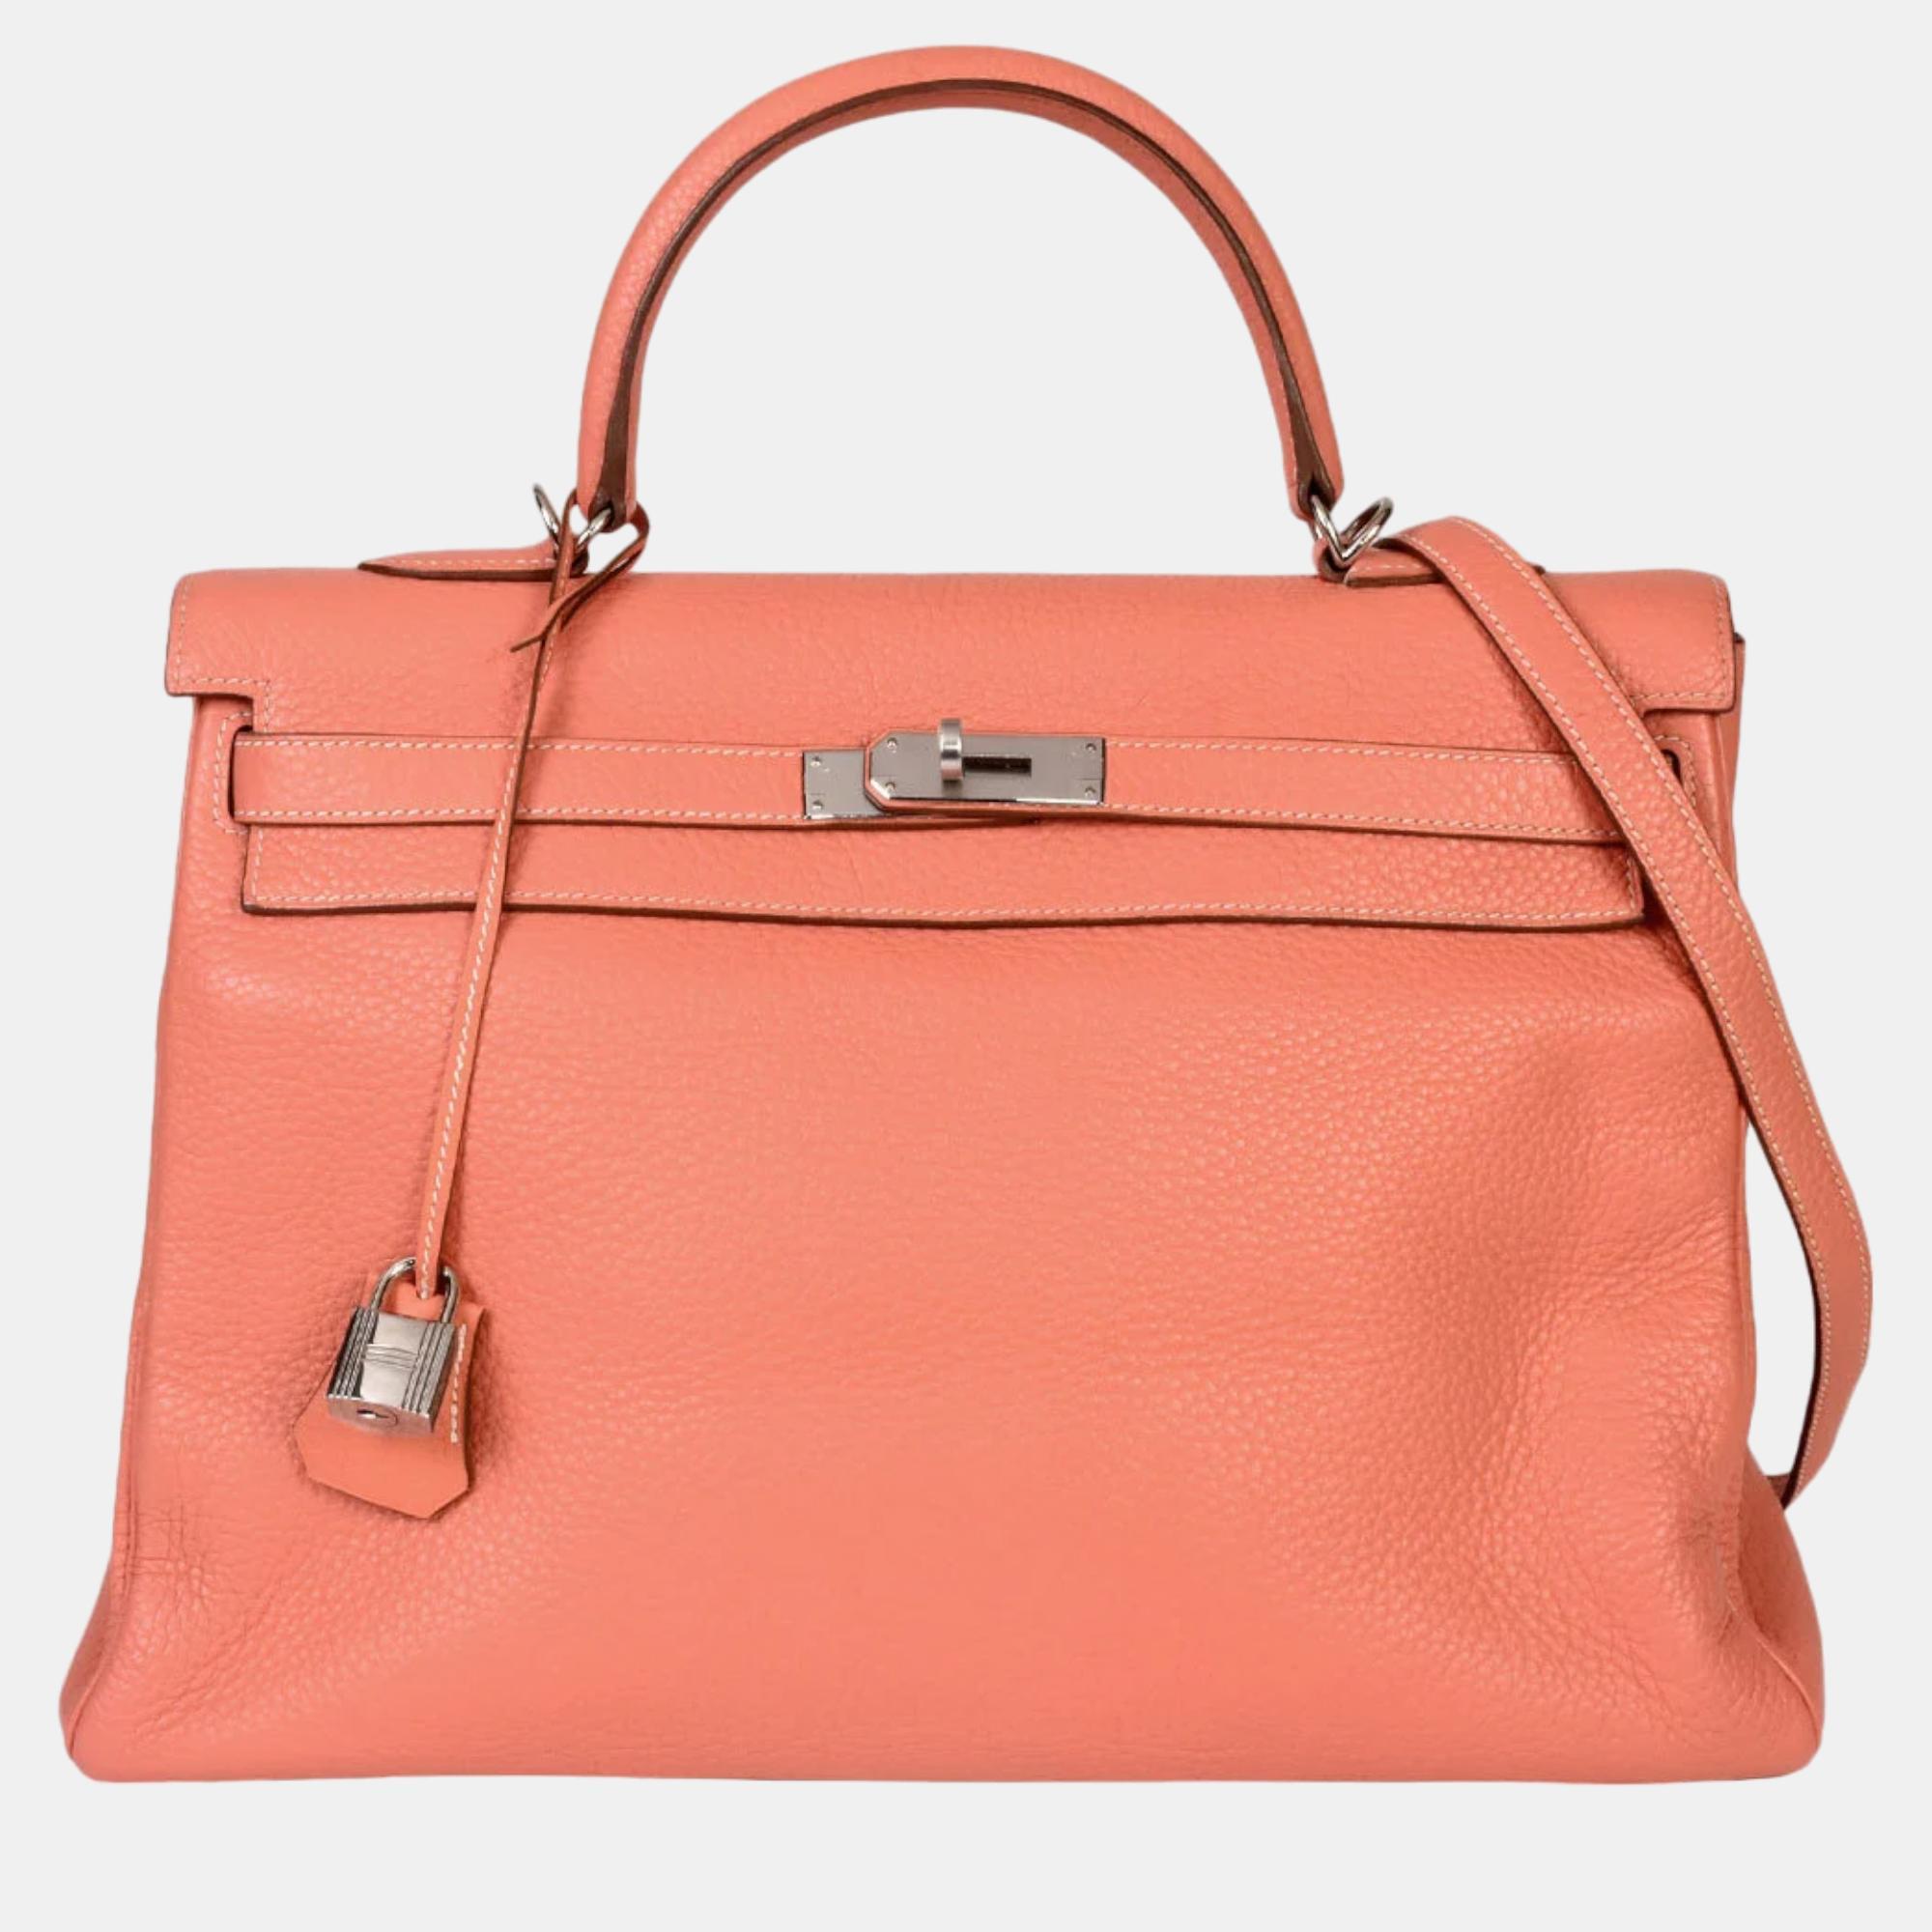 Pre-owned Hermes Kelly 35 Inner Stitching Q Stamp (manufactured In 2013) Flamingo Taurillon Clemence Handbag W In Pink